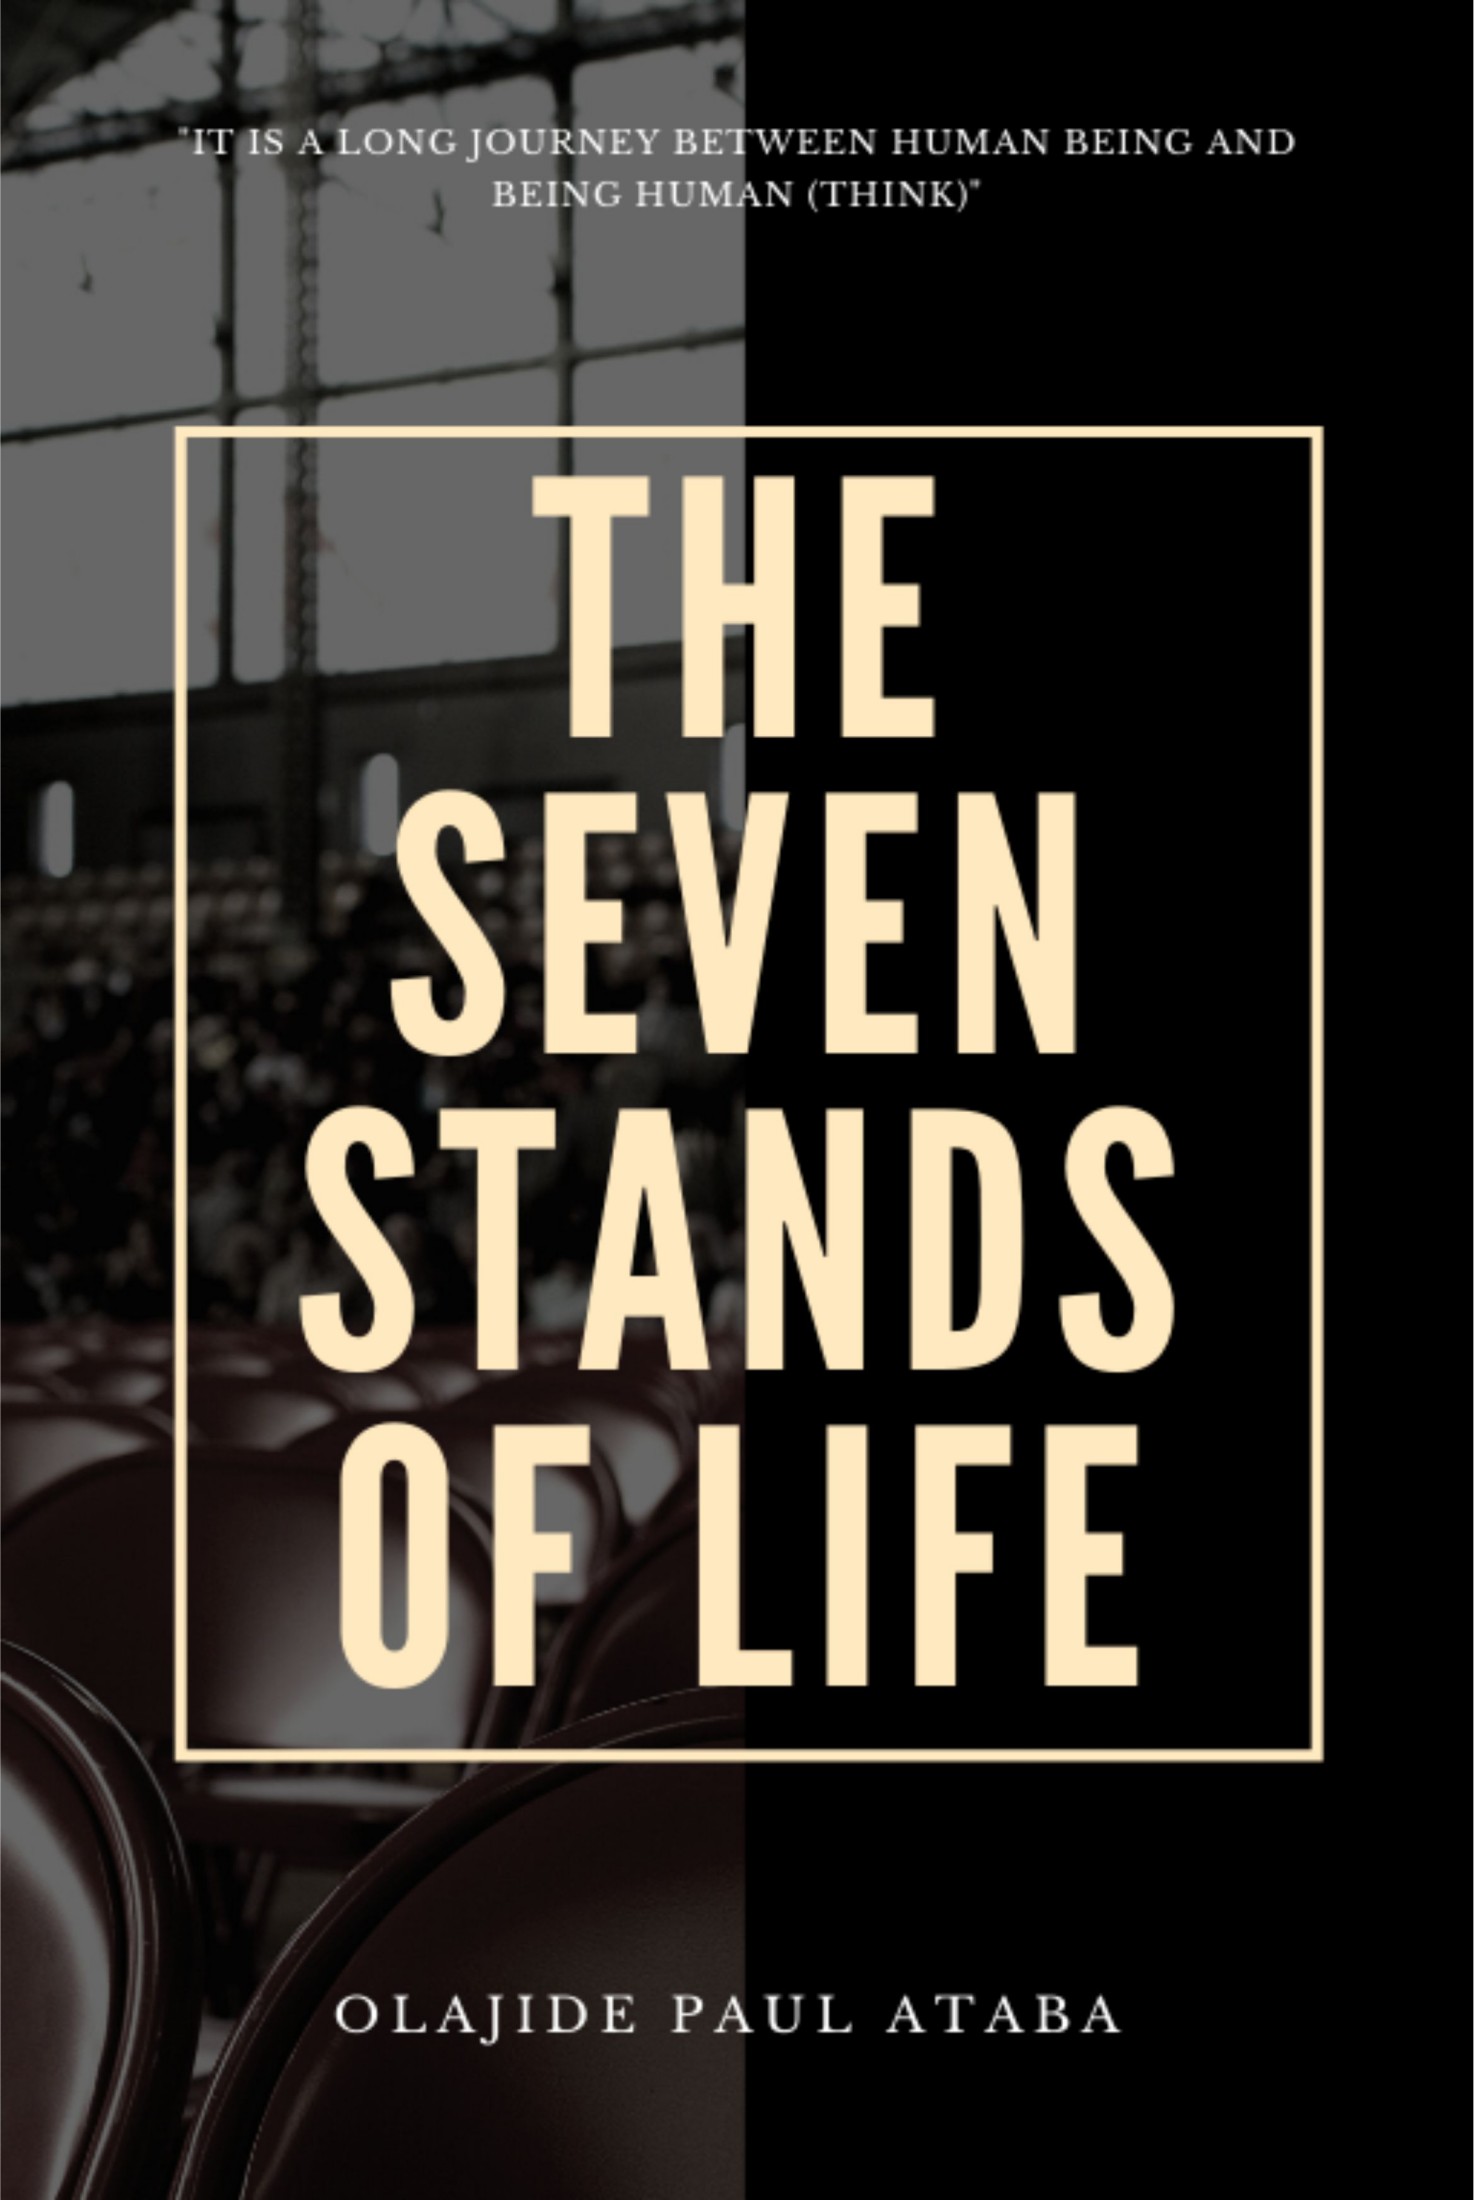 The-Seven-Stands-of-Life